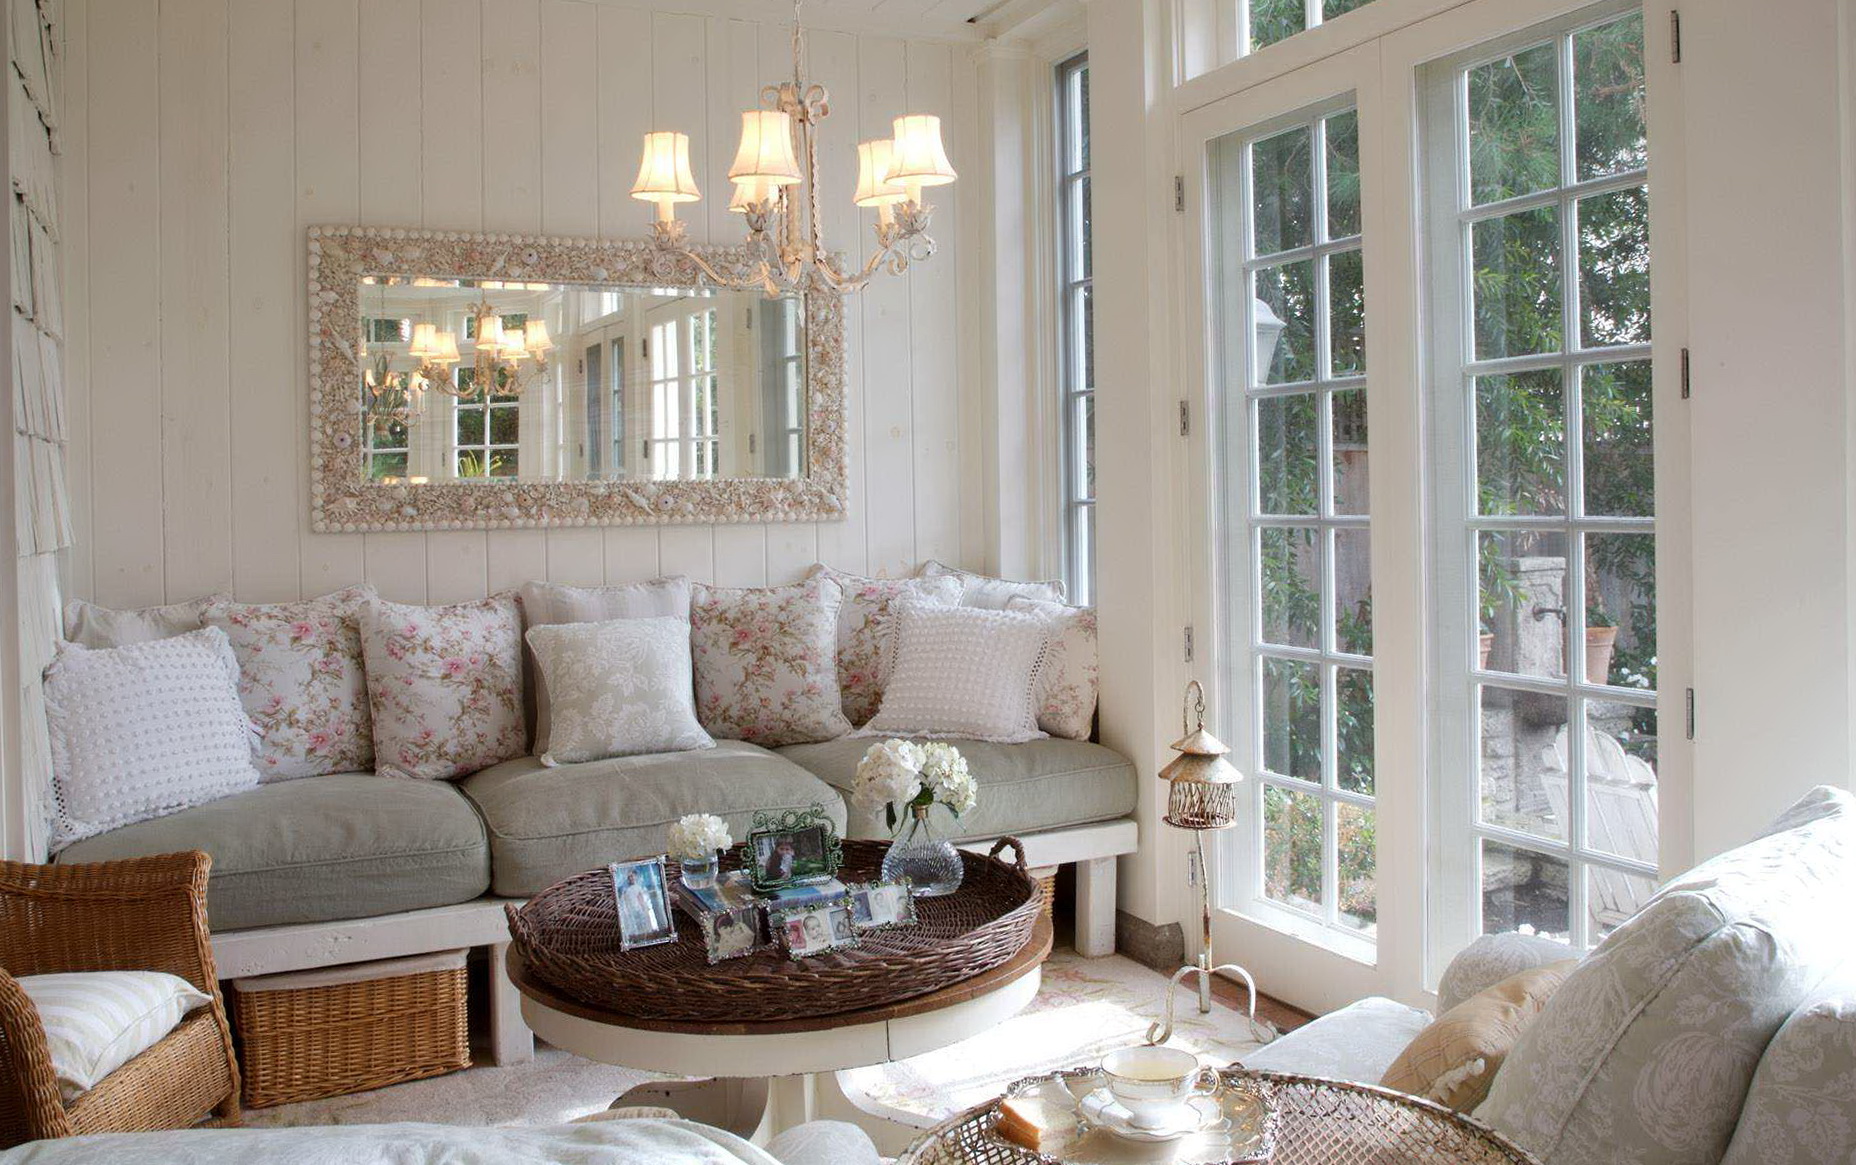 Small Living Room Chandeliers Home Design Ideas